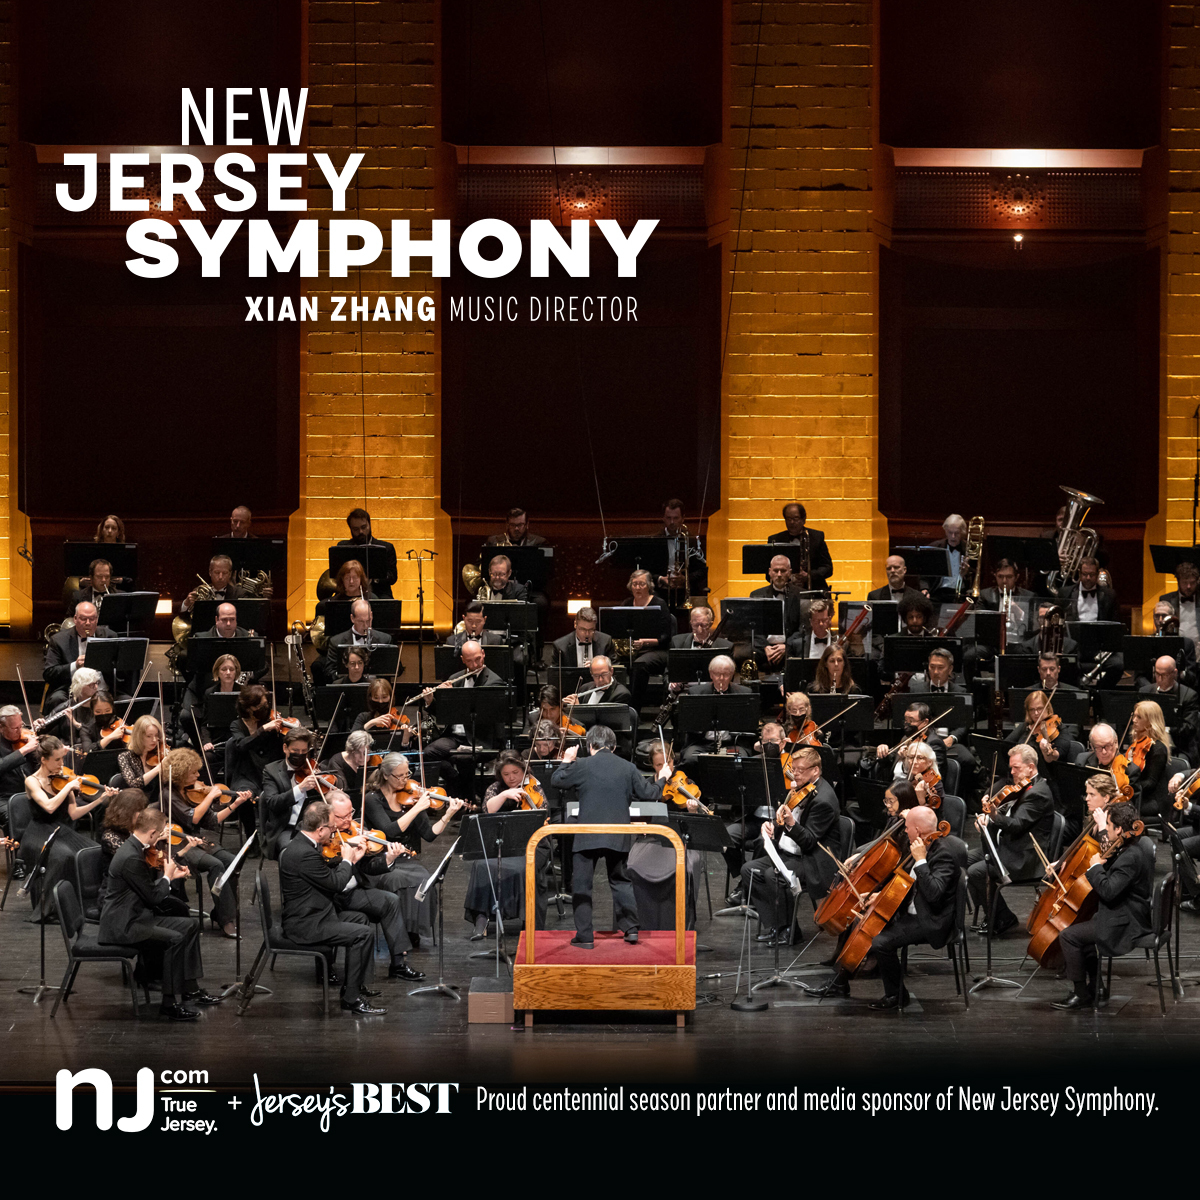 New Jersey Symphony welcomes you